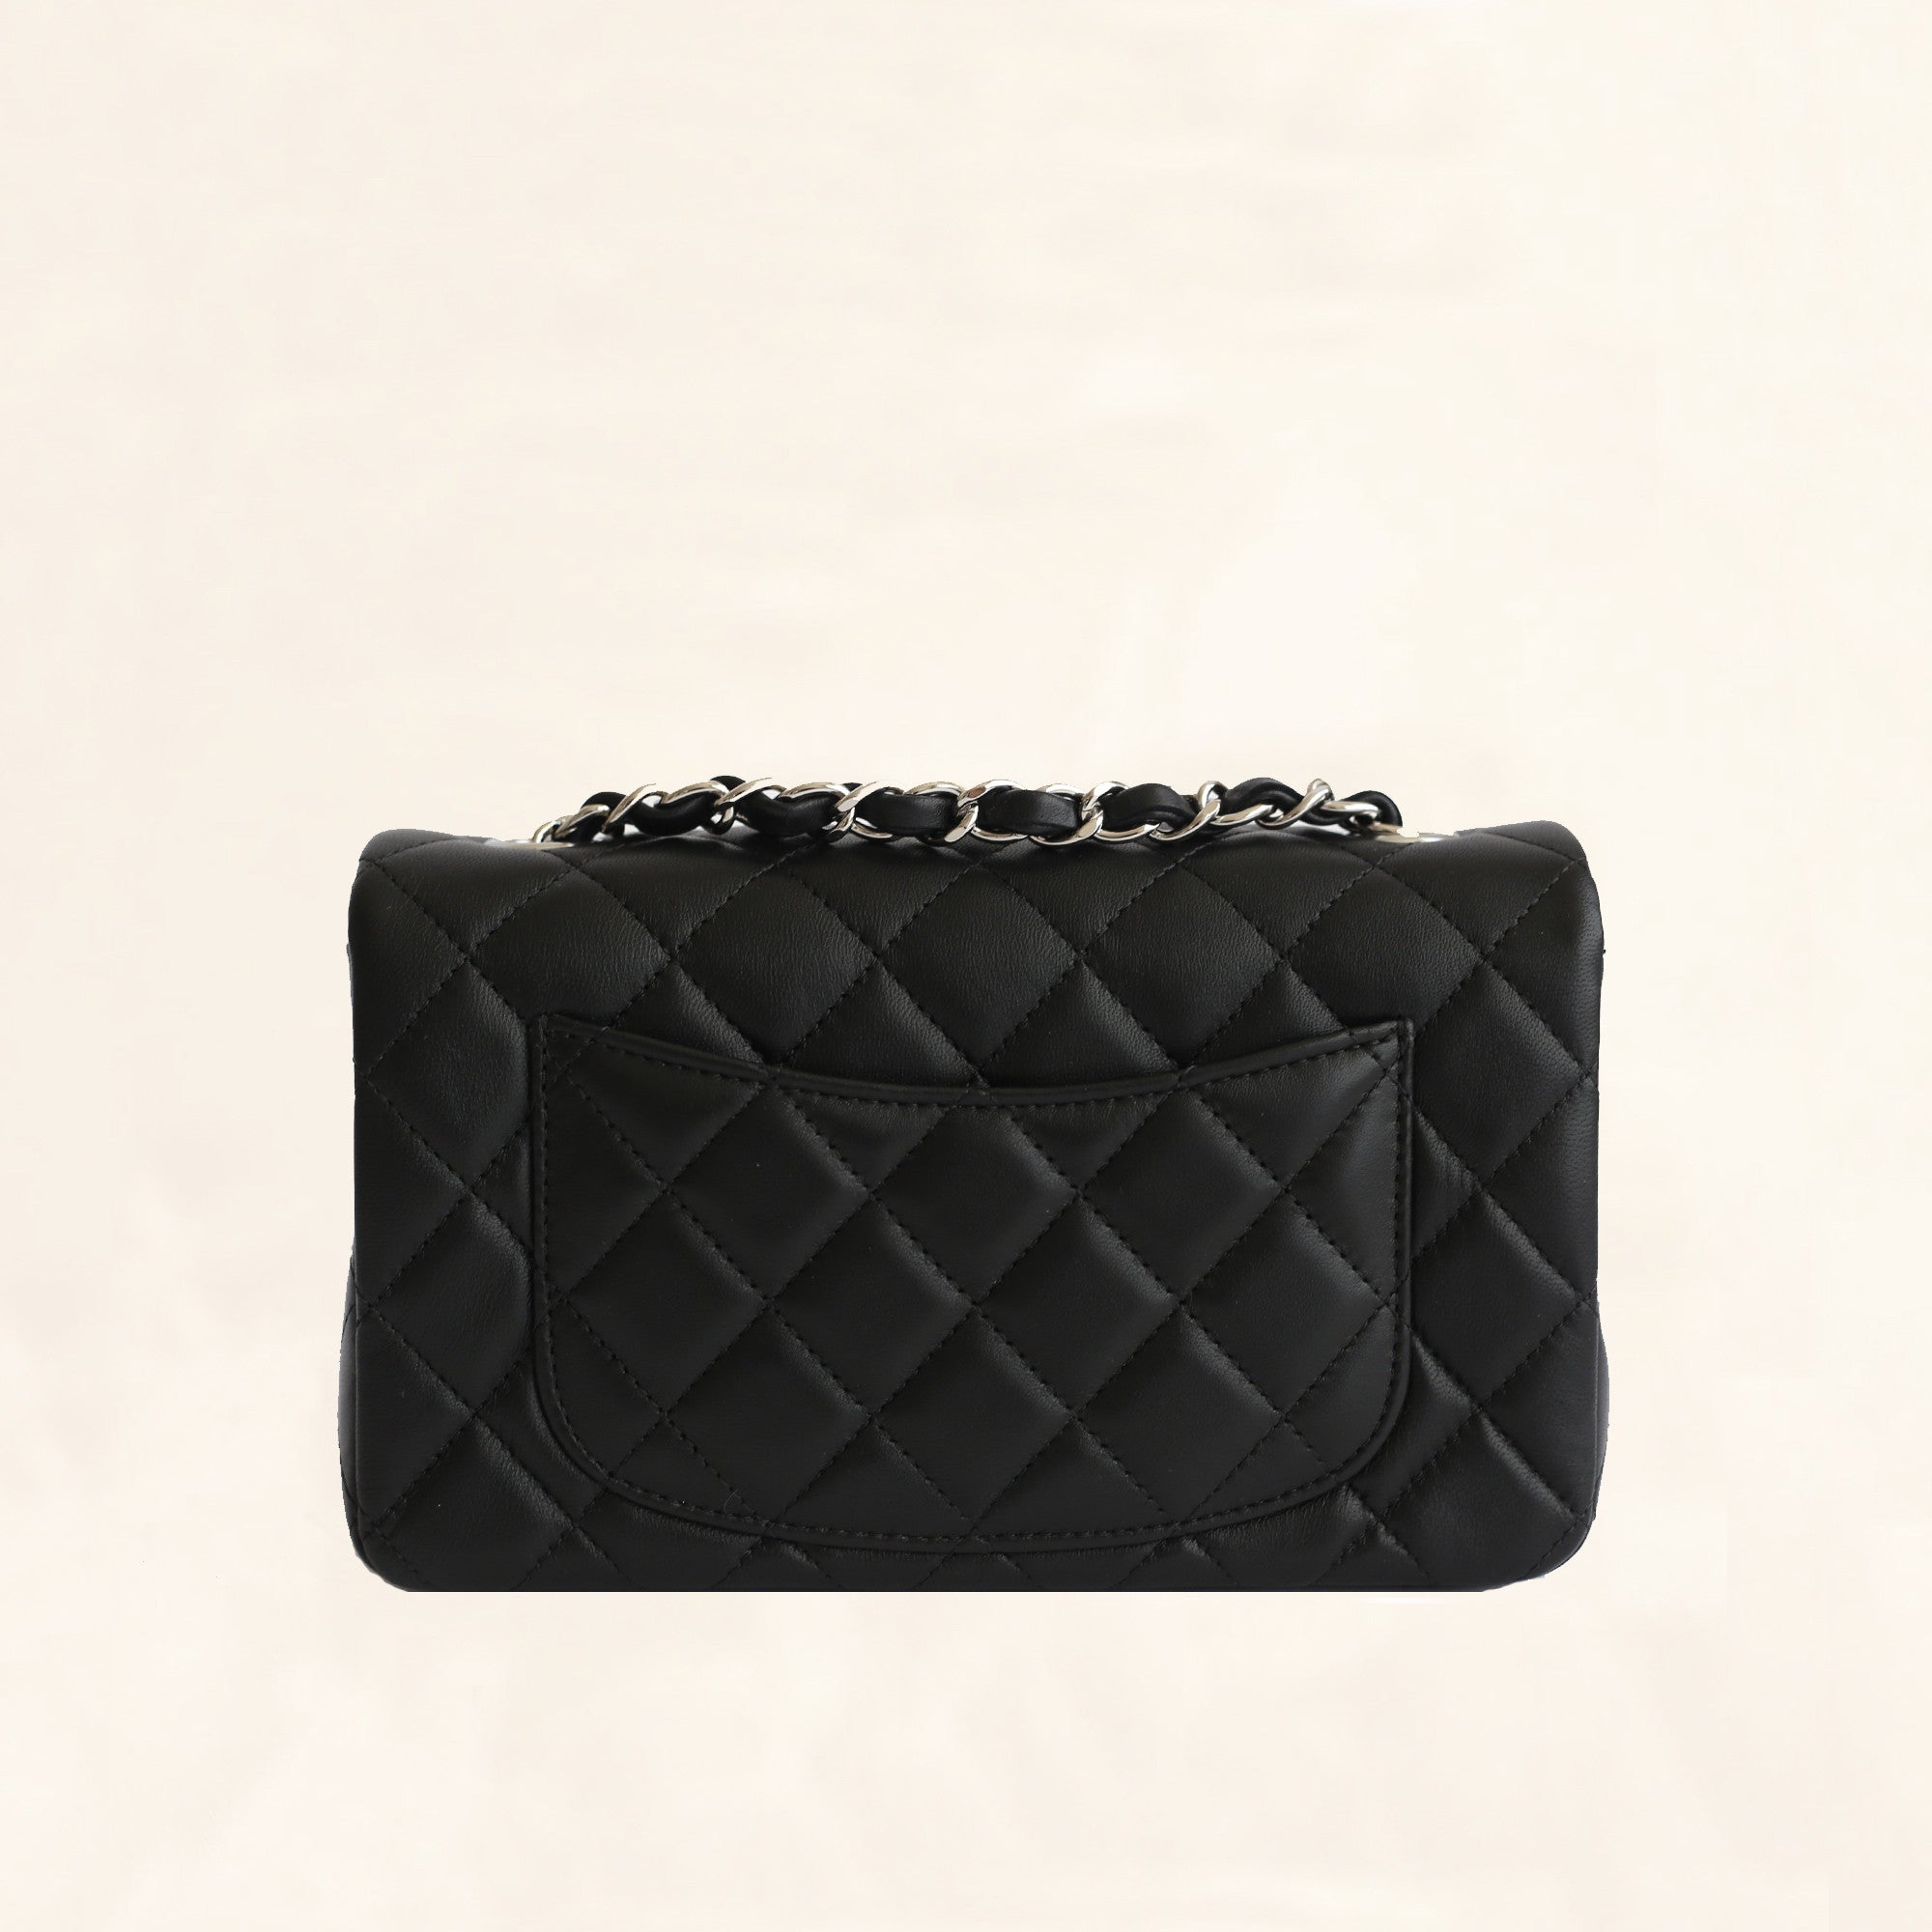 Chanel Classic Long Flap Purse Wallet in Black Caviar with Silver Hardware  - SOLD